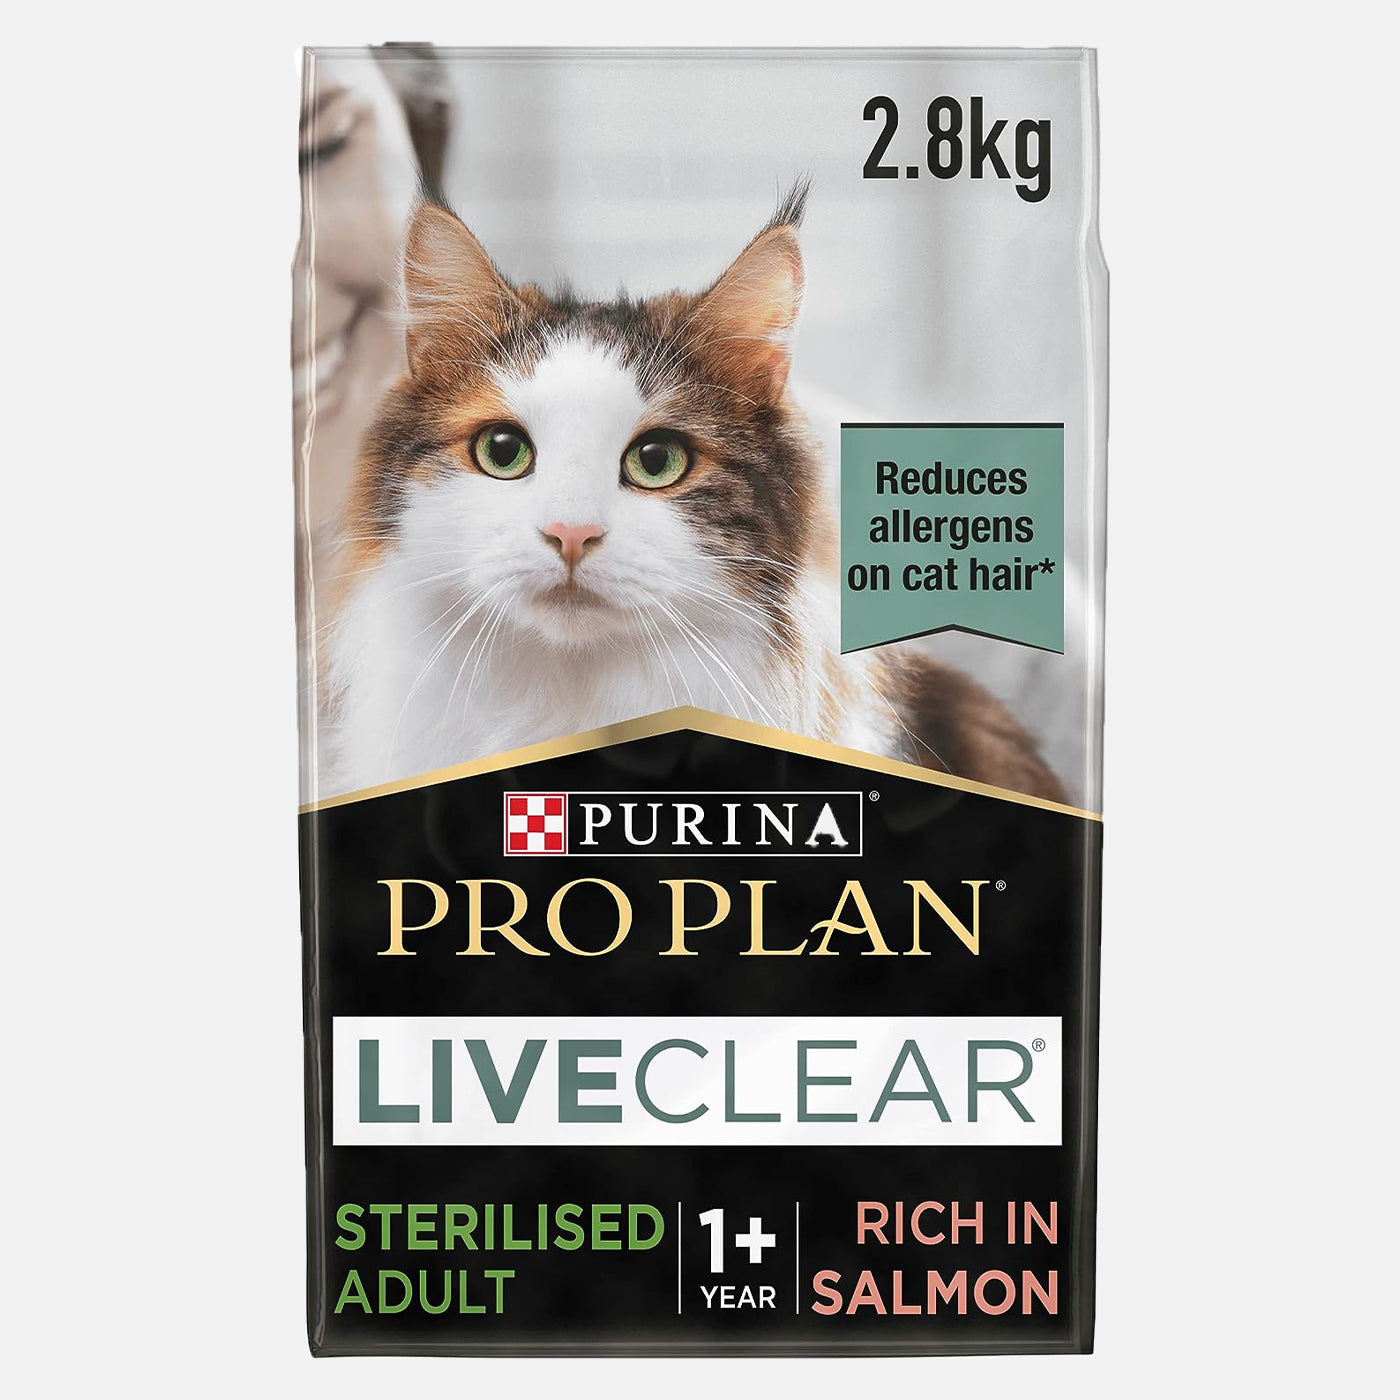 PRO PLAN Live Clear Sterilised Adult Cat Dry Food with Salmon 2.8kg